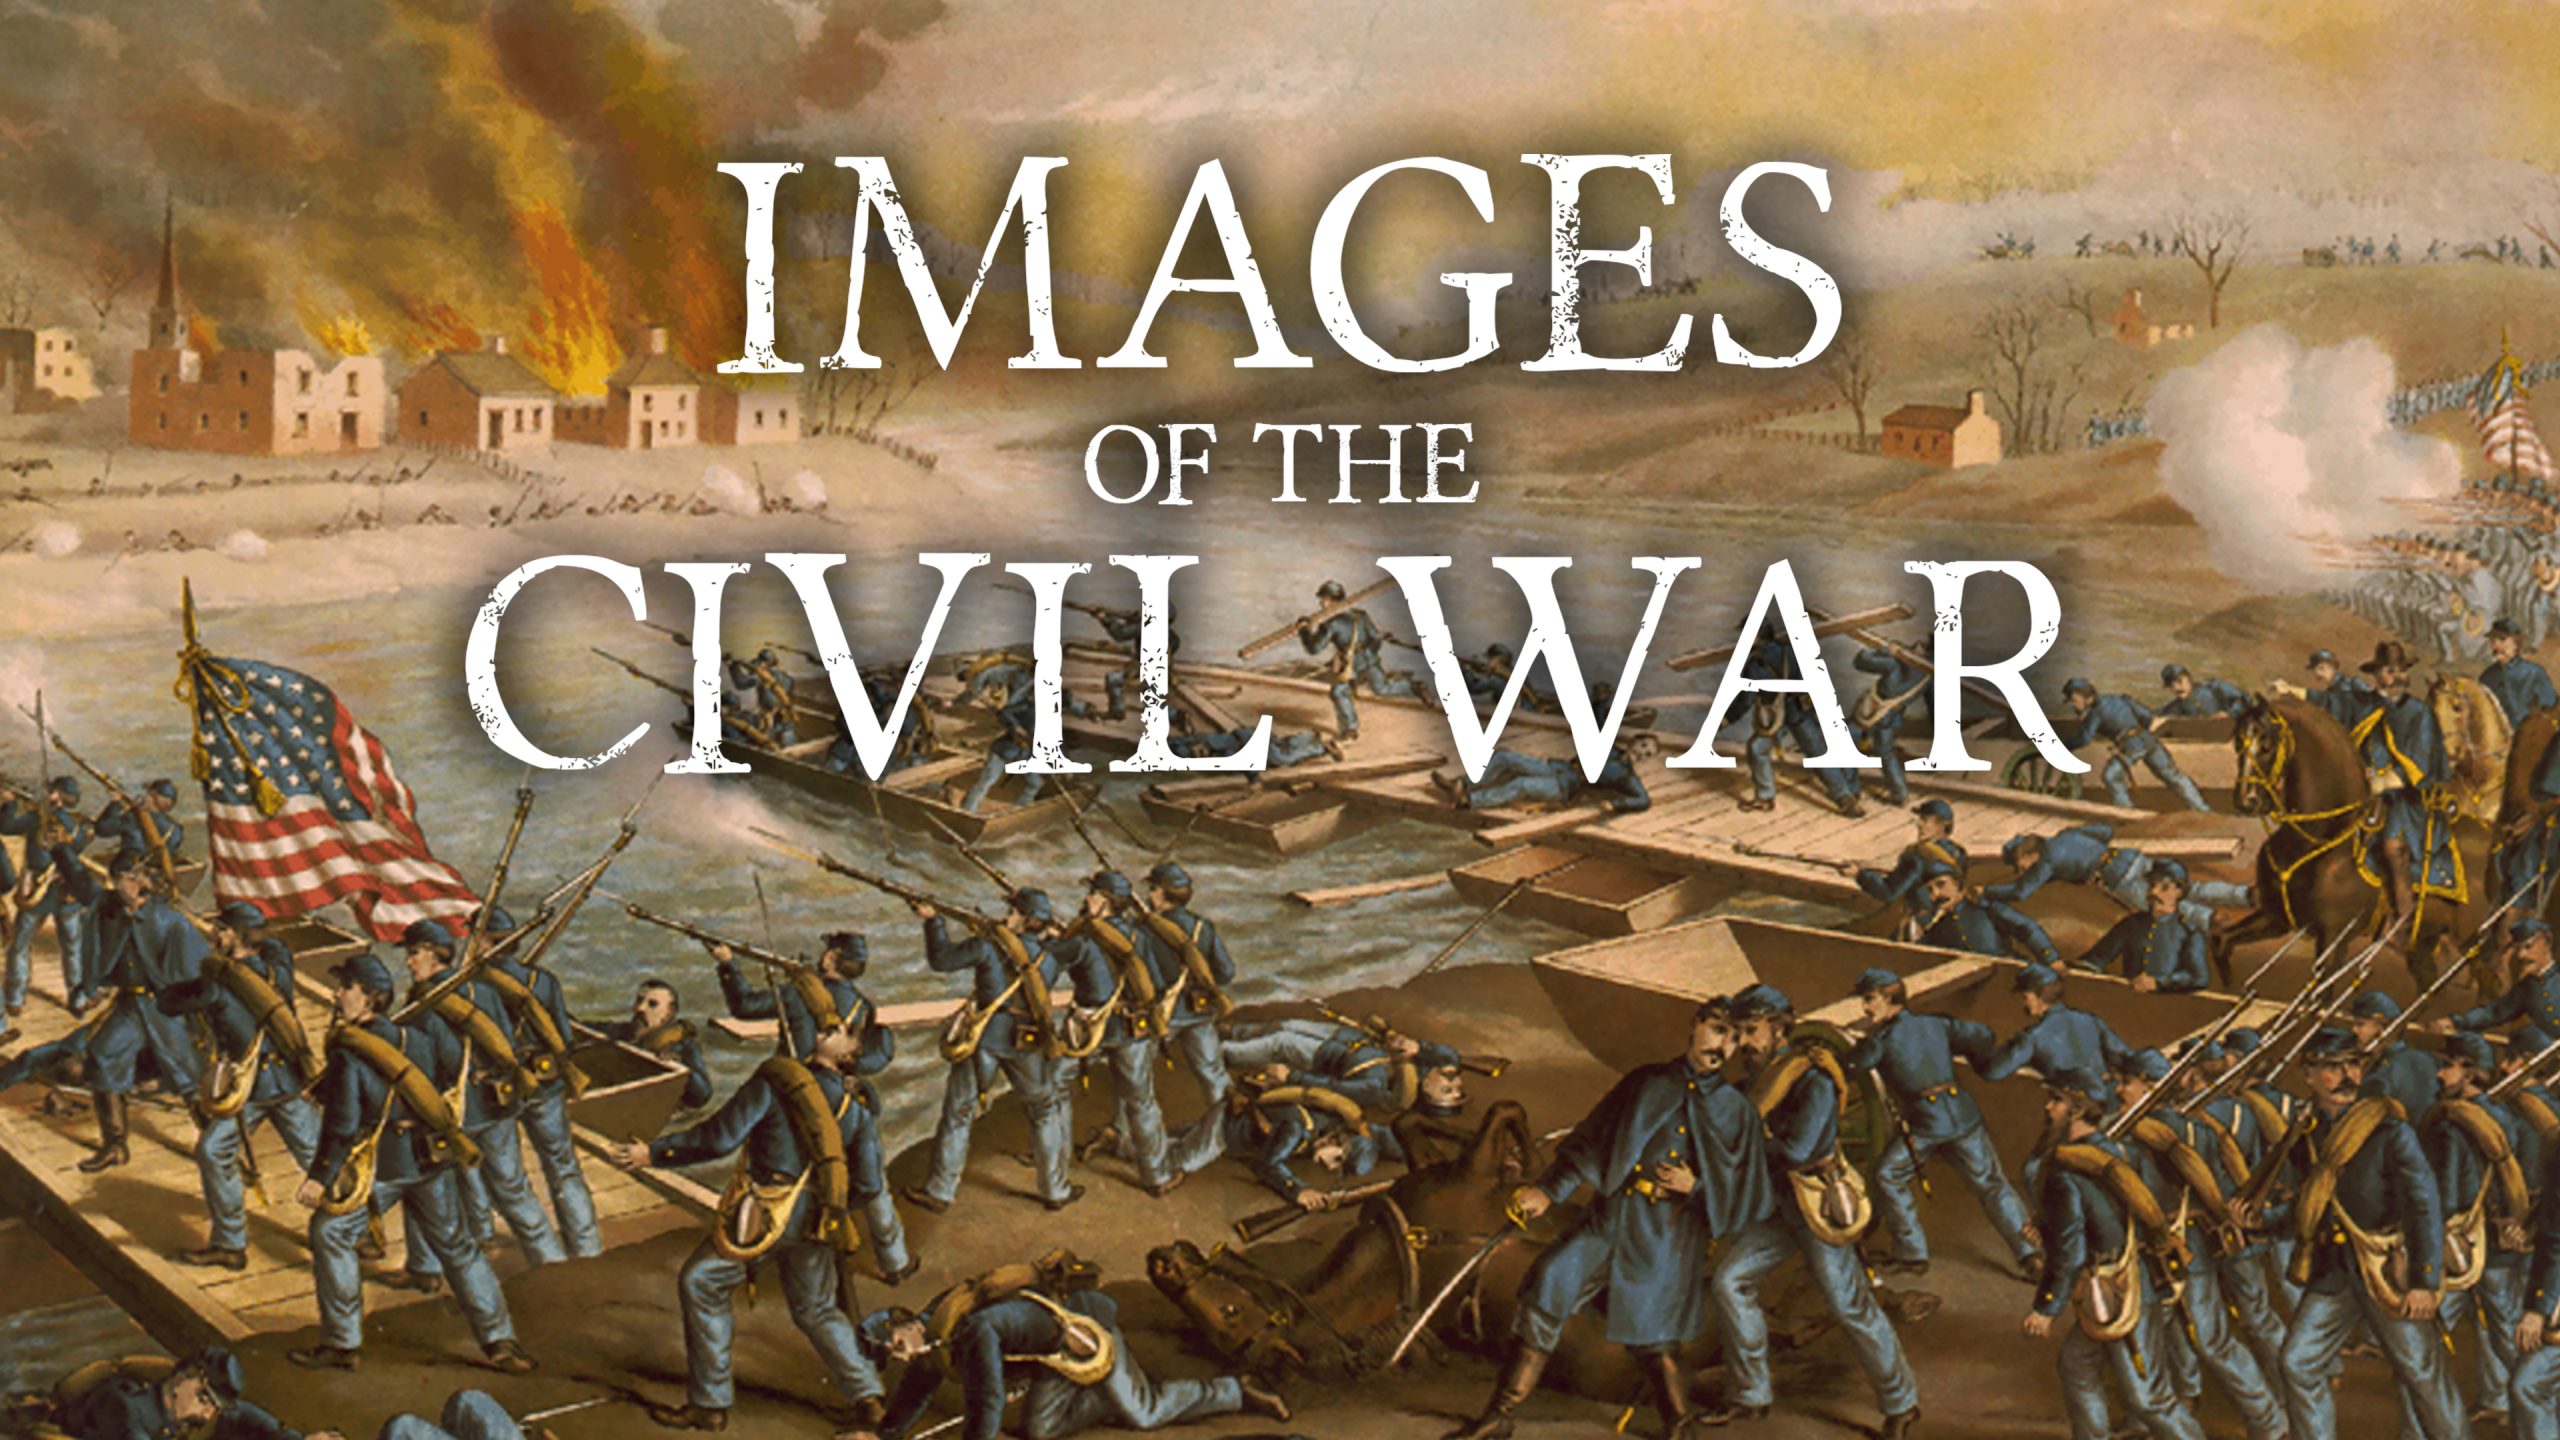 The Most Daring Mission The American Civil War